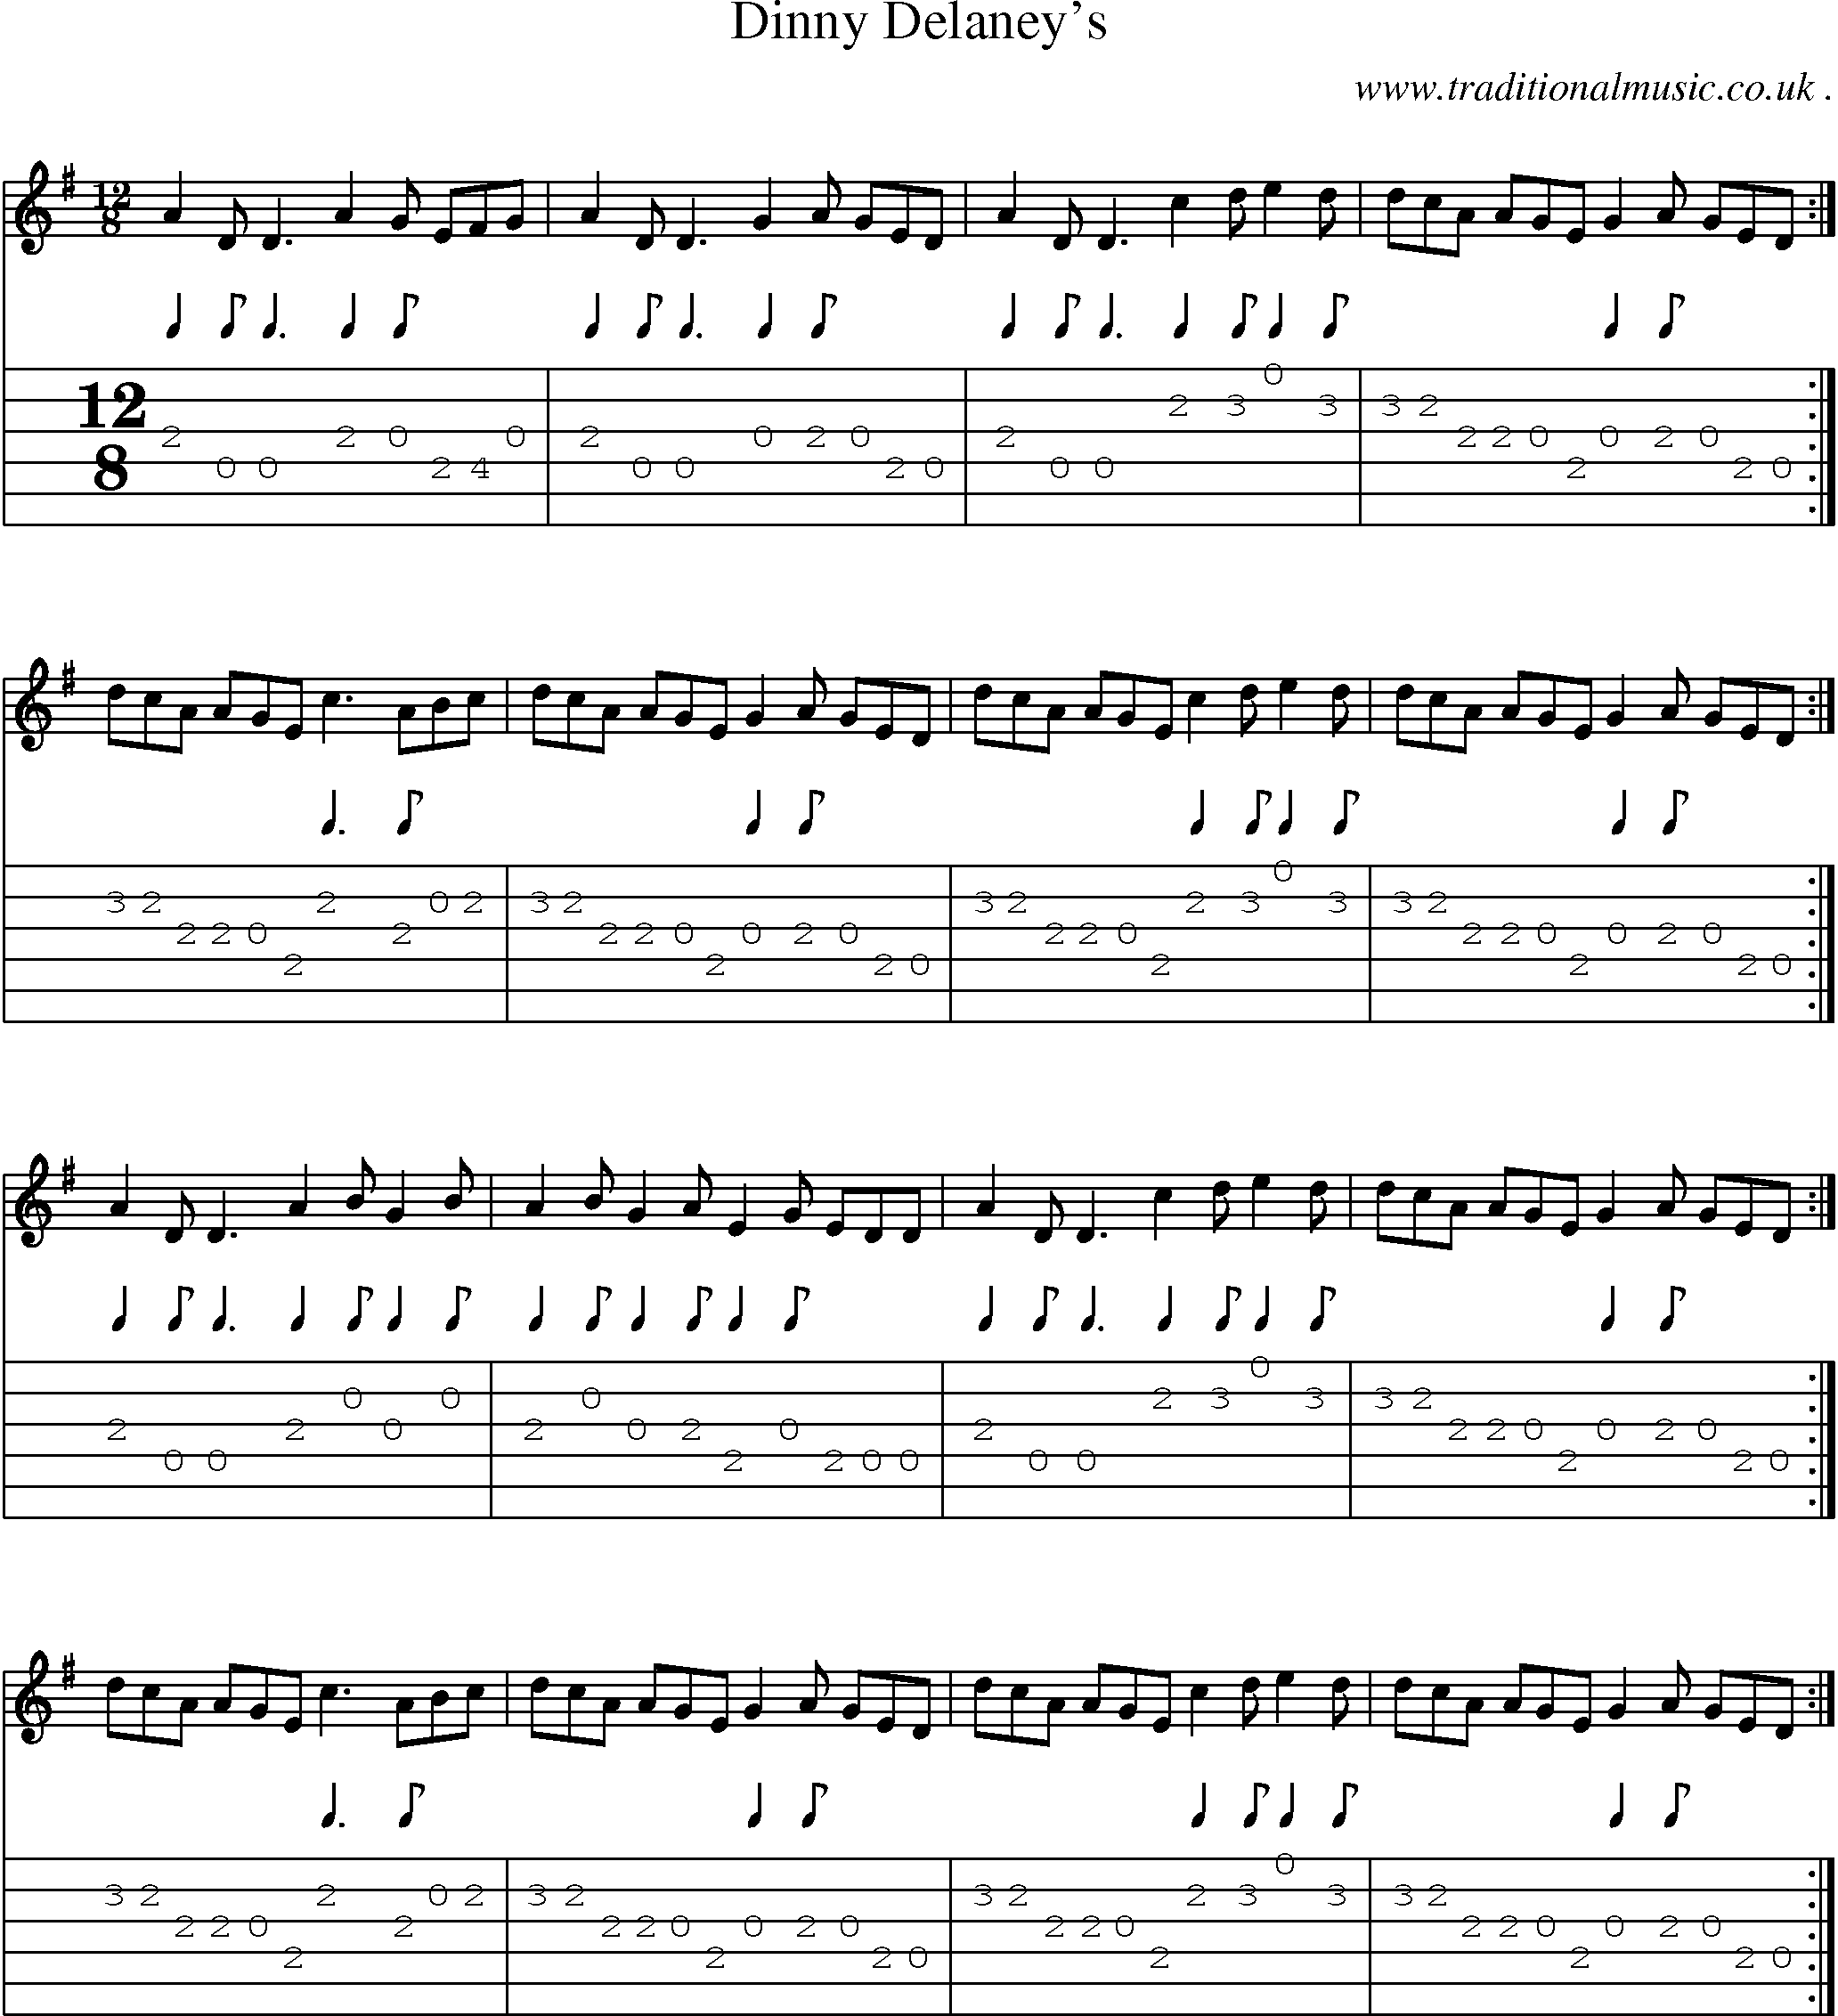 Sheet-Music and Guitar Tabs for Dinny Delaneys